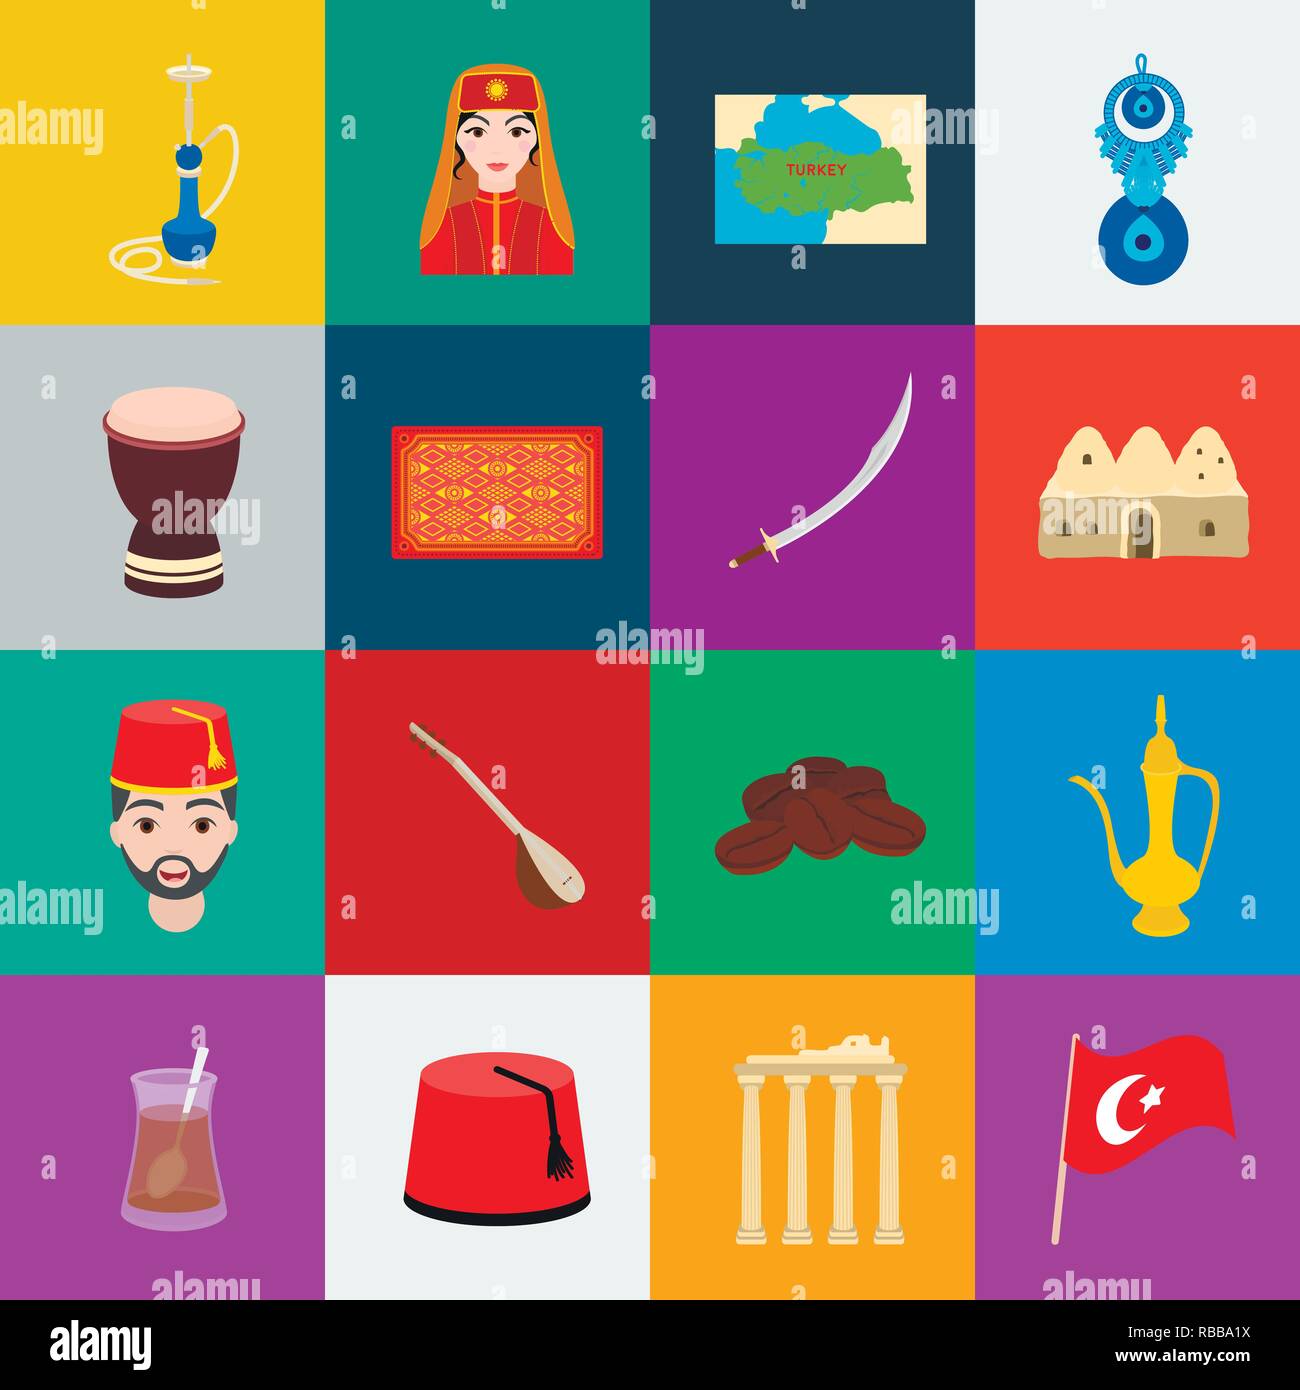 amulet,art,attraction,beans,beehive,carpet,cartoon,coffee,collection,country,culture,design,drum,fez,flag,goblet,hookah,house,icon,illustration,isolated,journey,jug,kilij,logo,man,nazar,population,ruins,saz,set,showplace,sight,sign,symbol,tea,territory,tourism,traditions,traveling,turkey,turkish,vector,web,woman Vector Vectors , Stock Vector